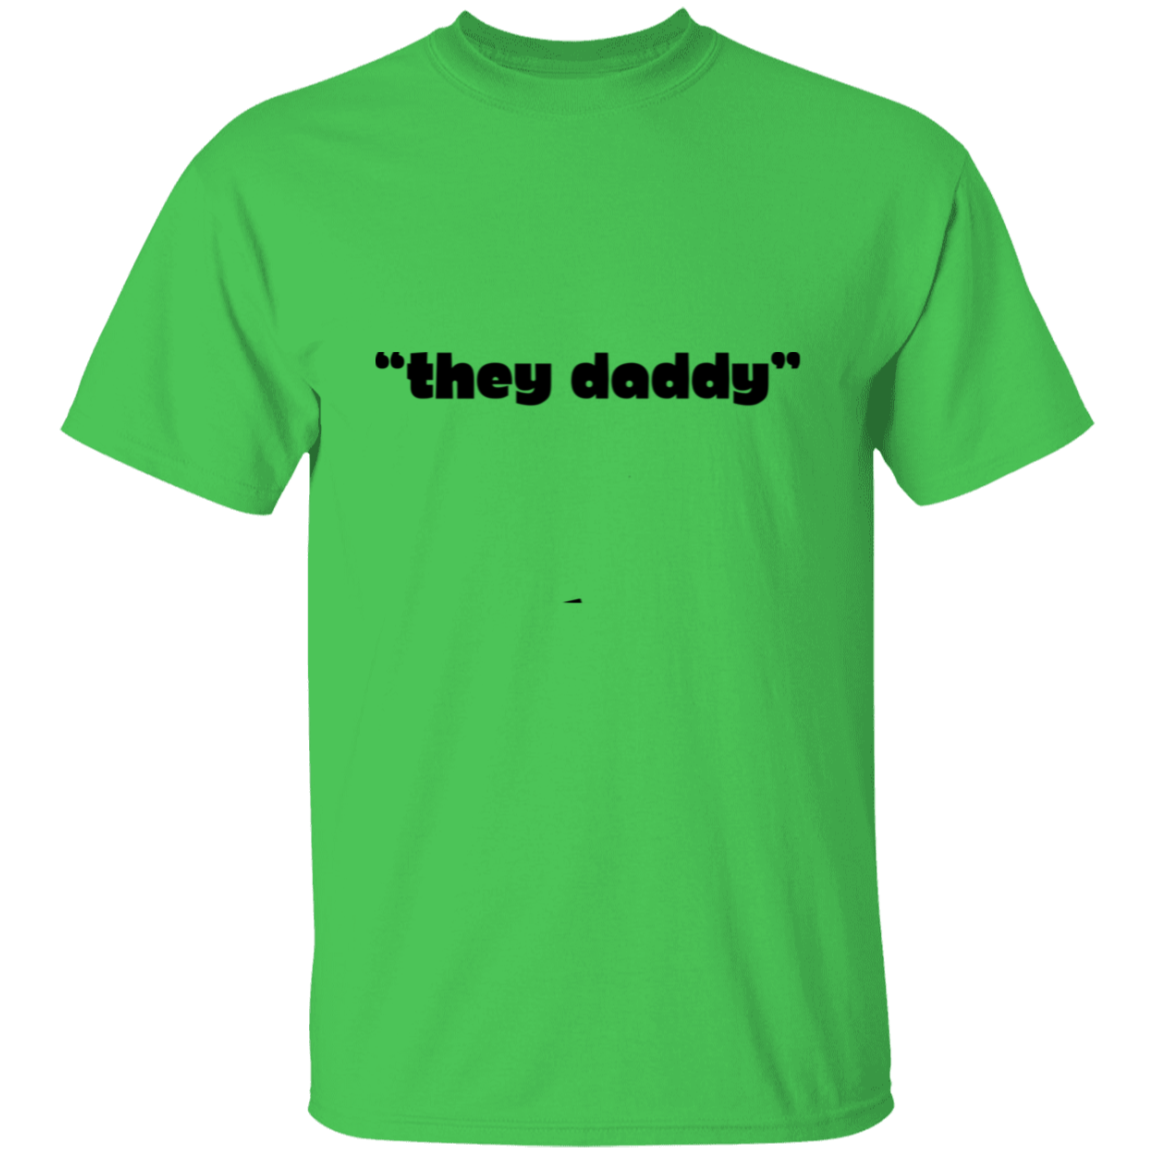 "They Daddy" FUN FAMILY T-Shirt